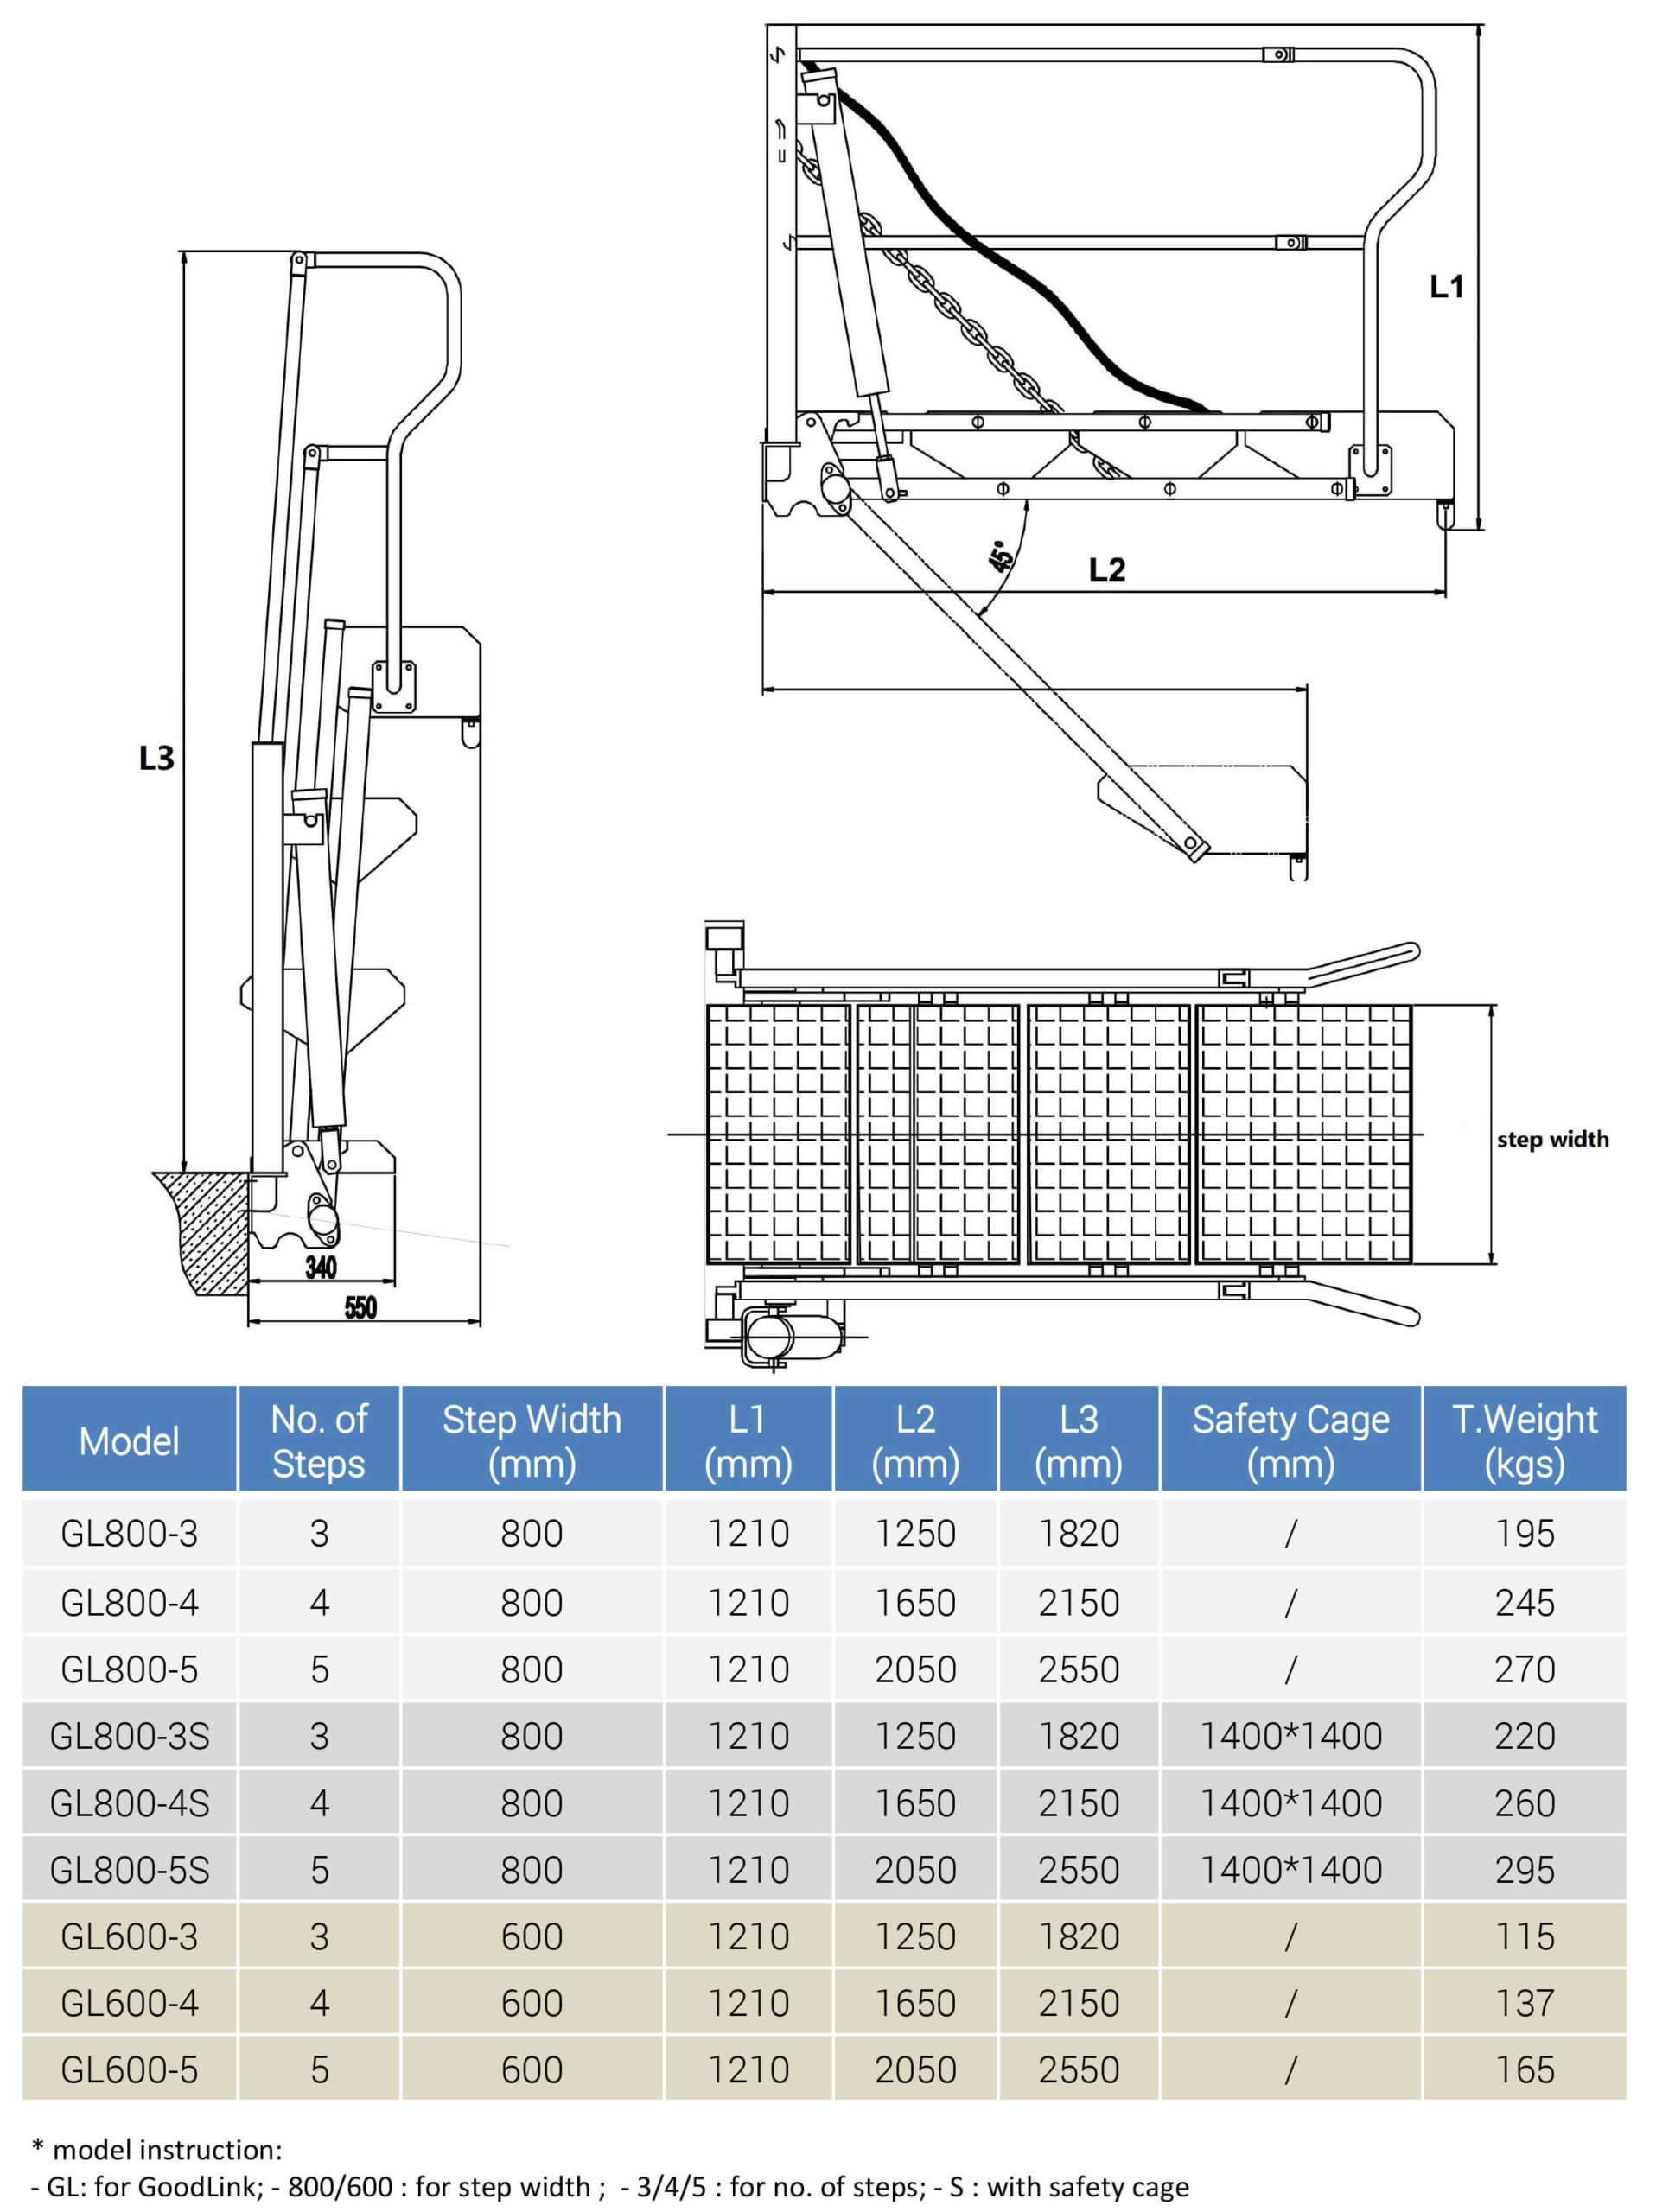 Goodlink Fluid Equipment folding stairs models and parameters